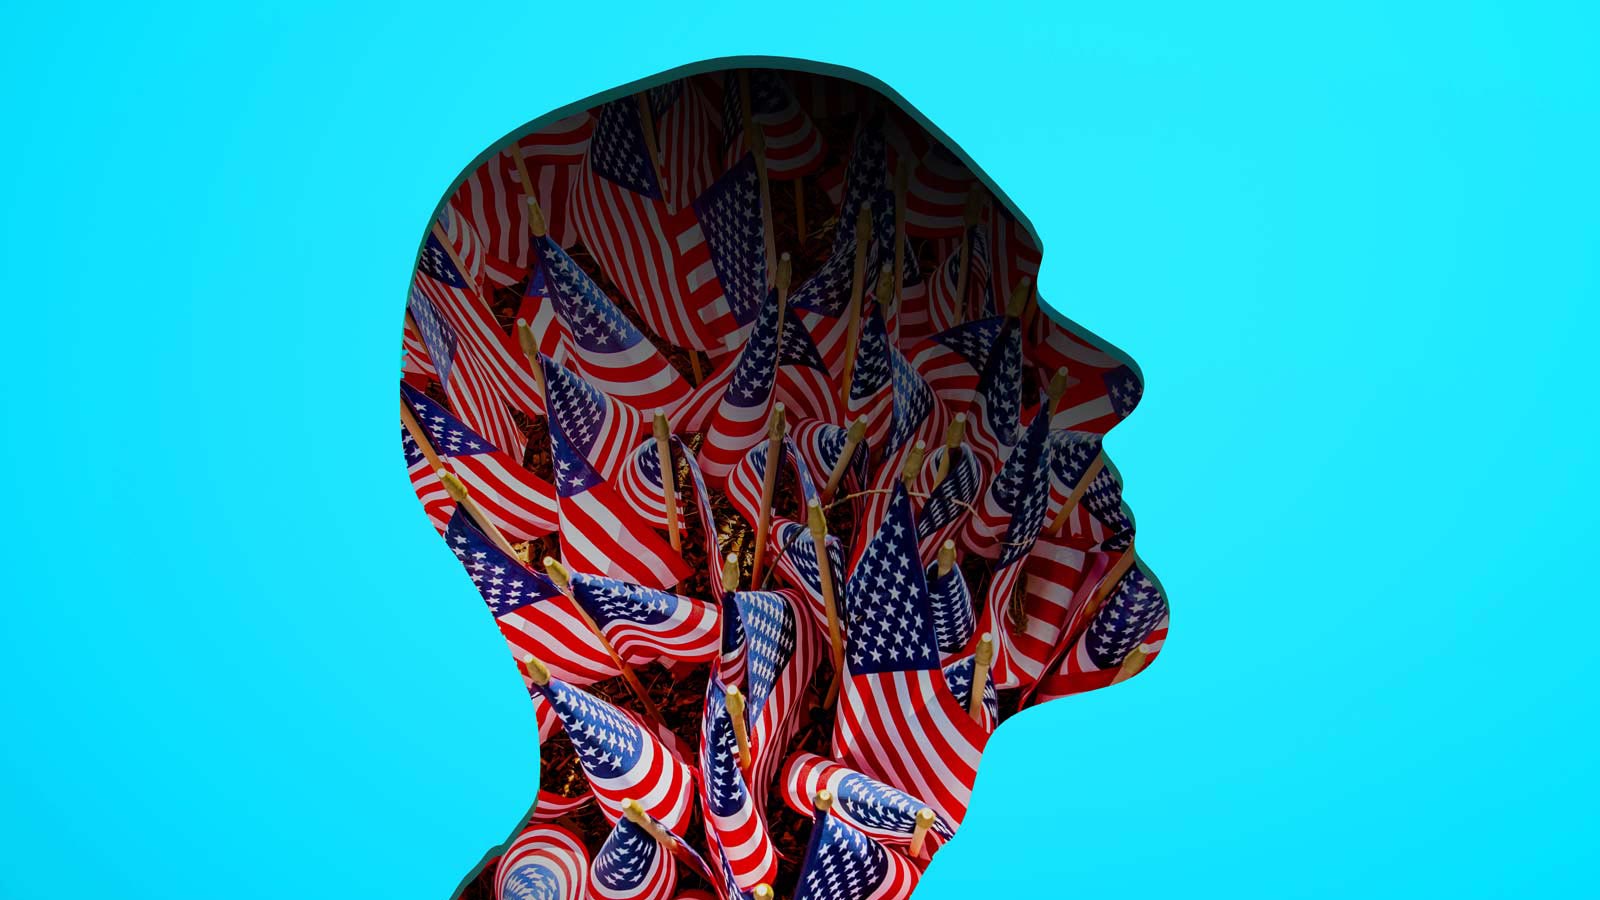 Digital generated image of silhouette of male head with U.S. flags inside